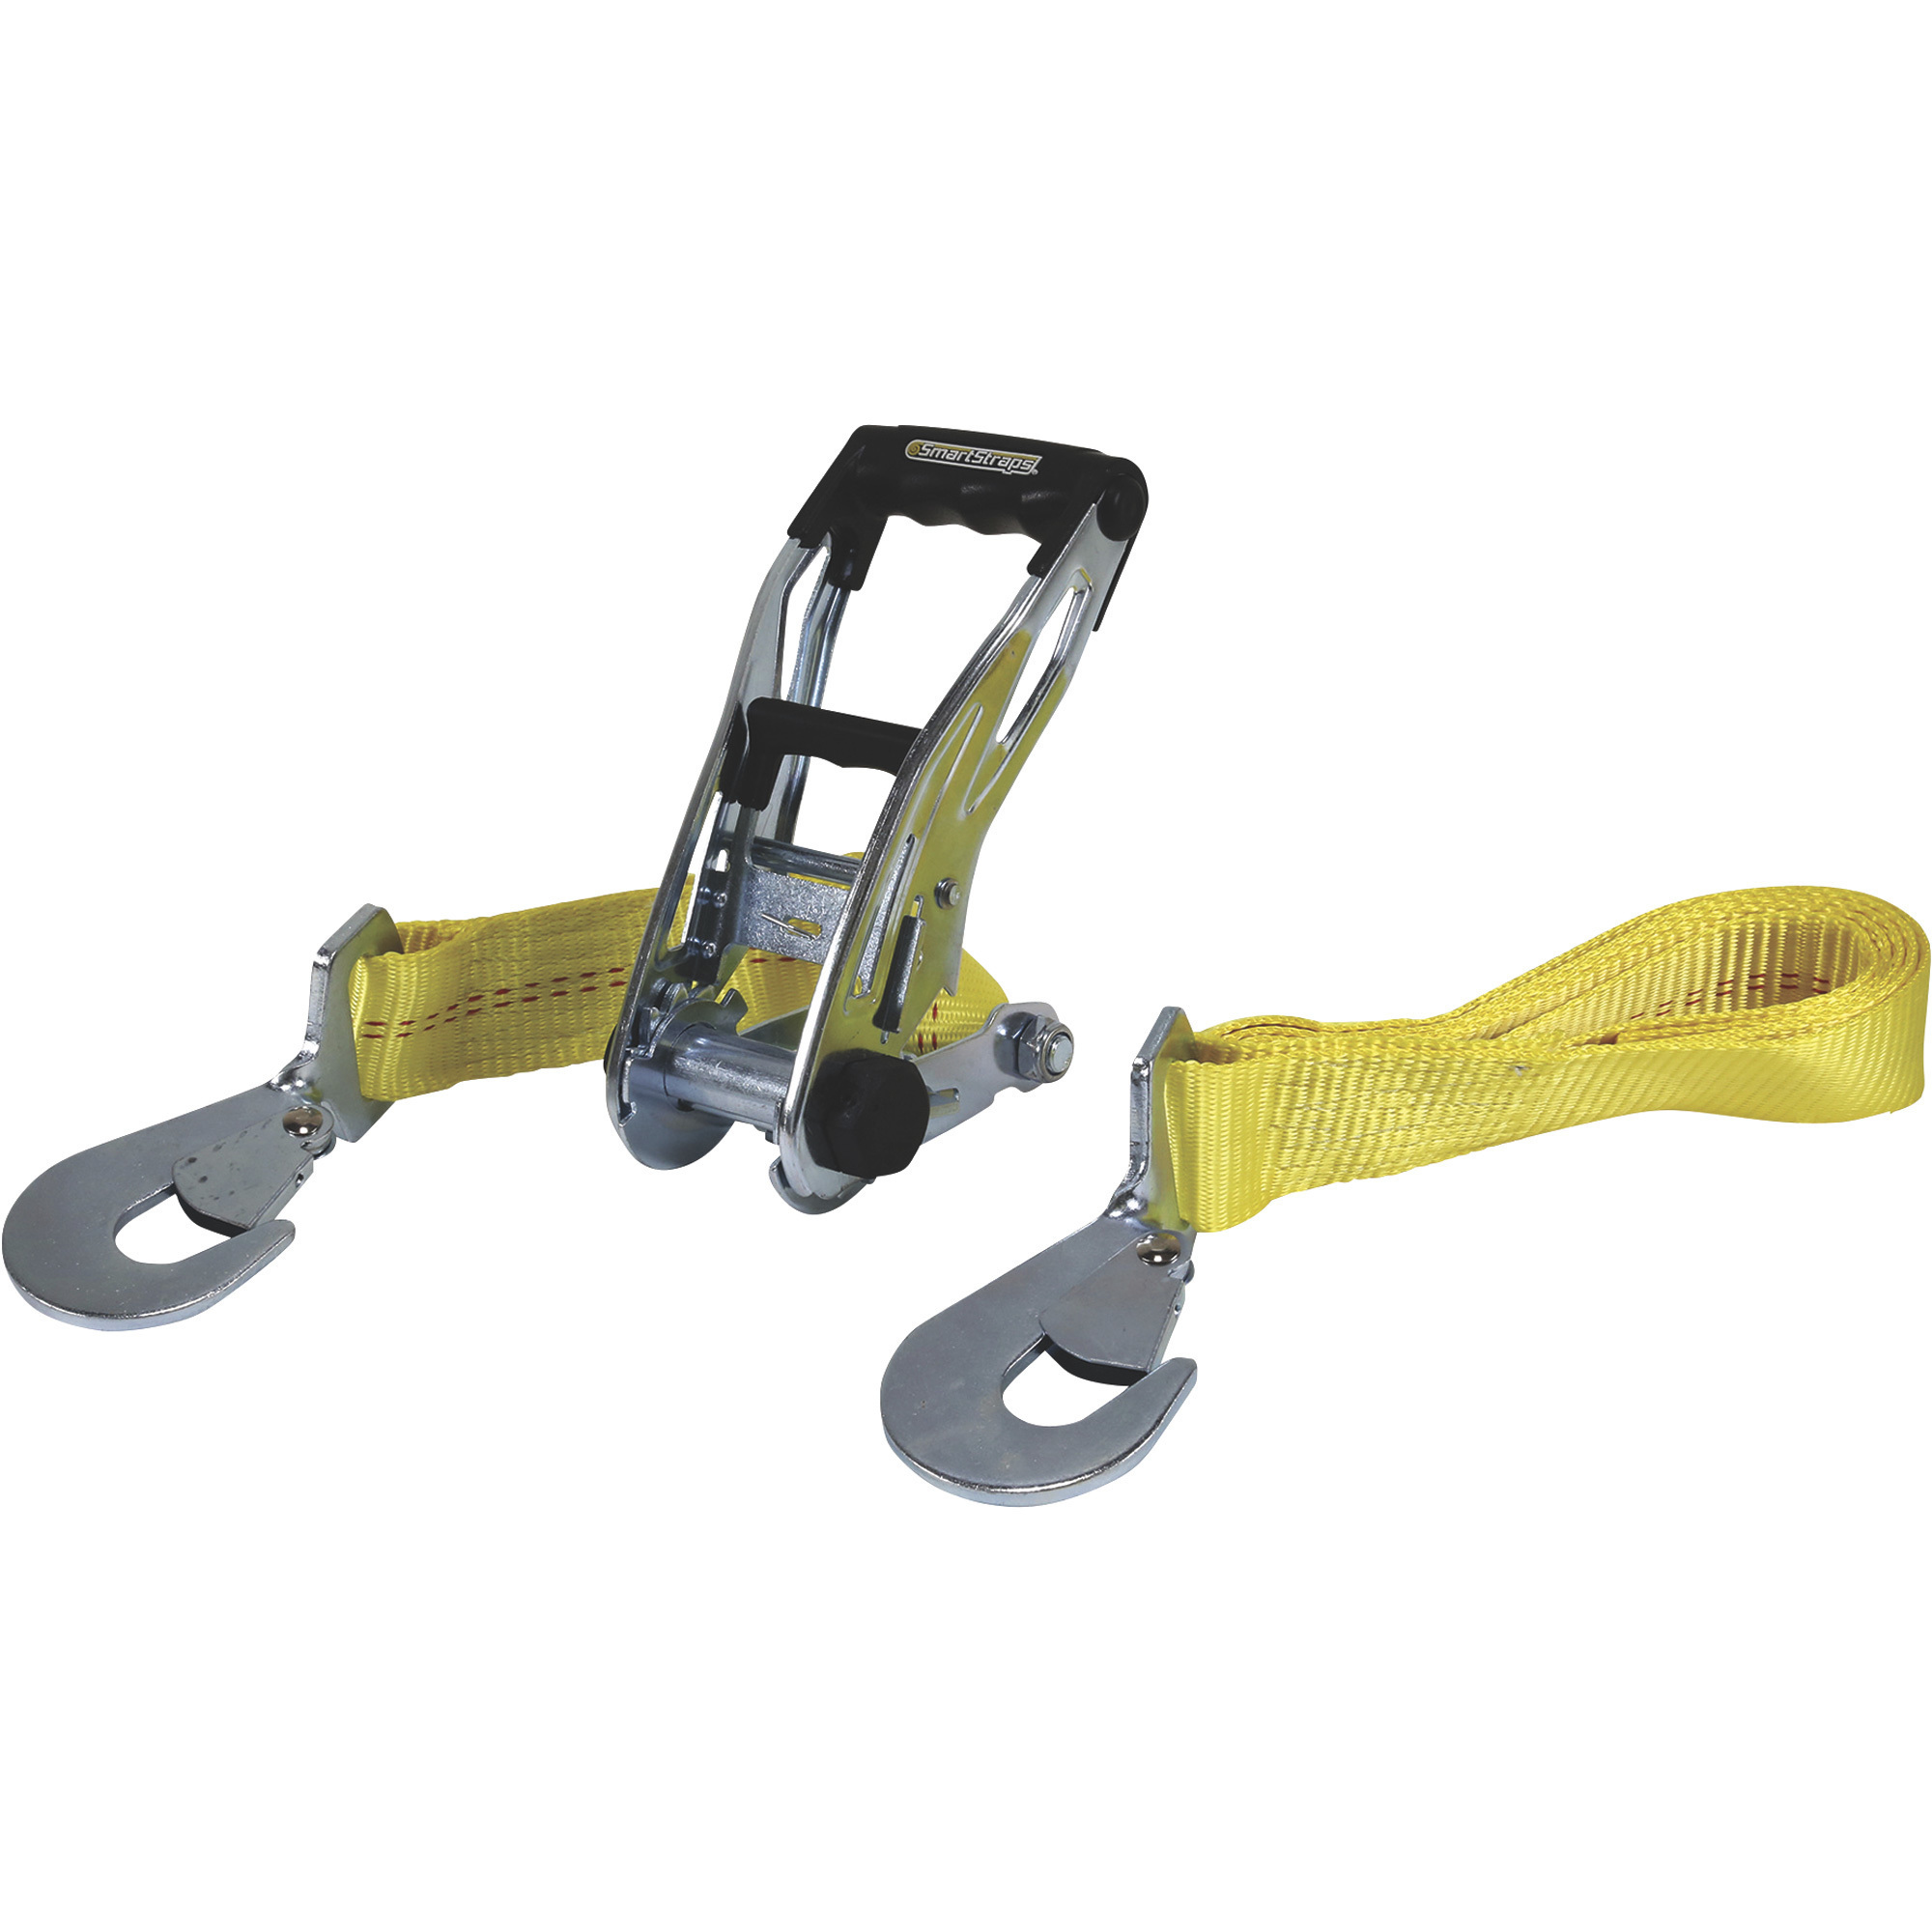 SmartStraps RatchetX Tie Down with Snap Hook, 27ft. x 2Inch, 10,000-Lb. Breaking Strength, Yellow, Model 858